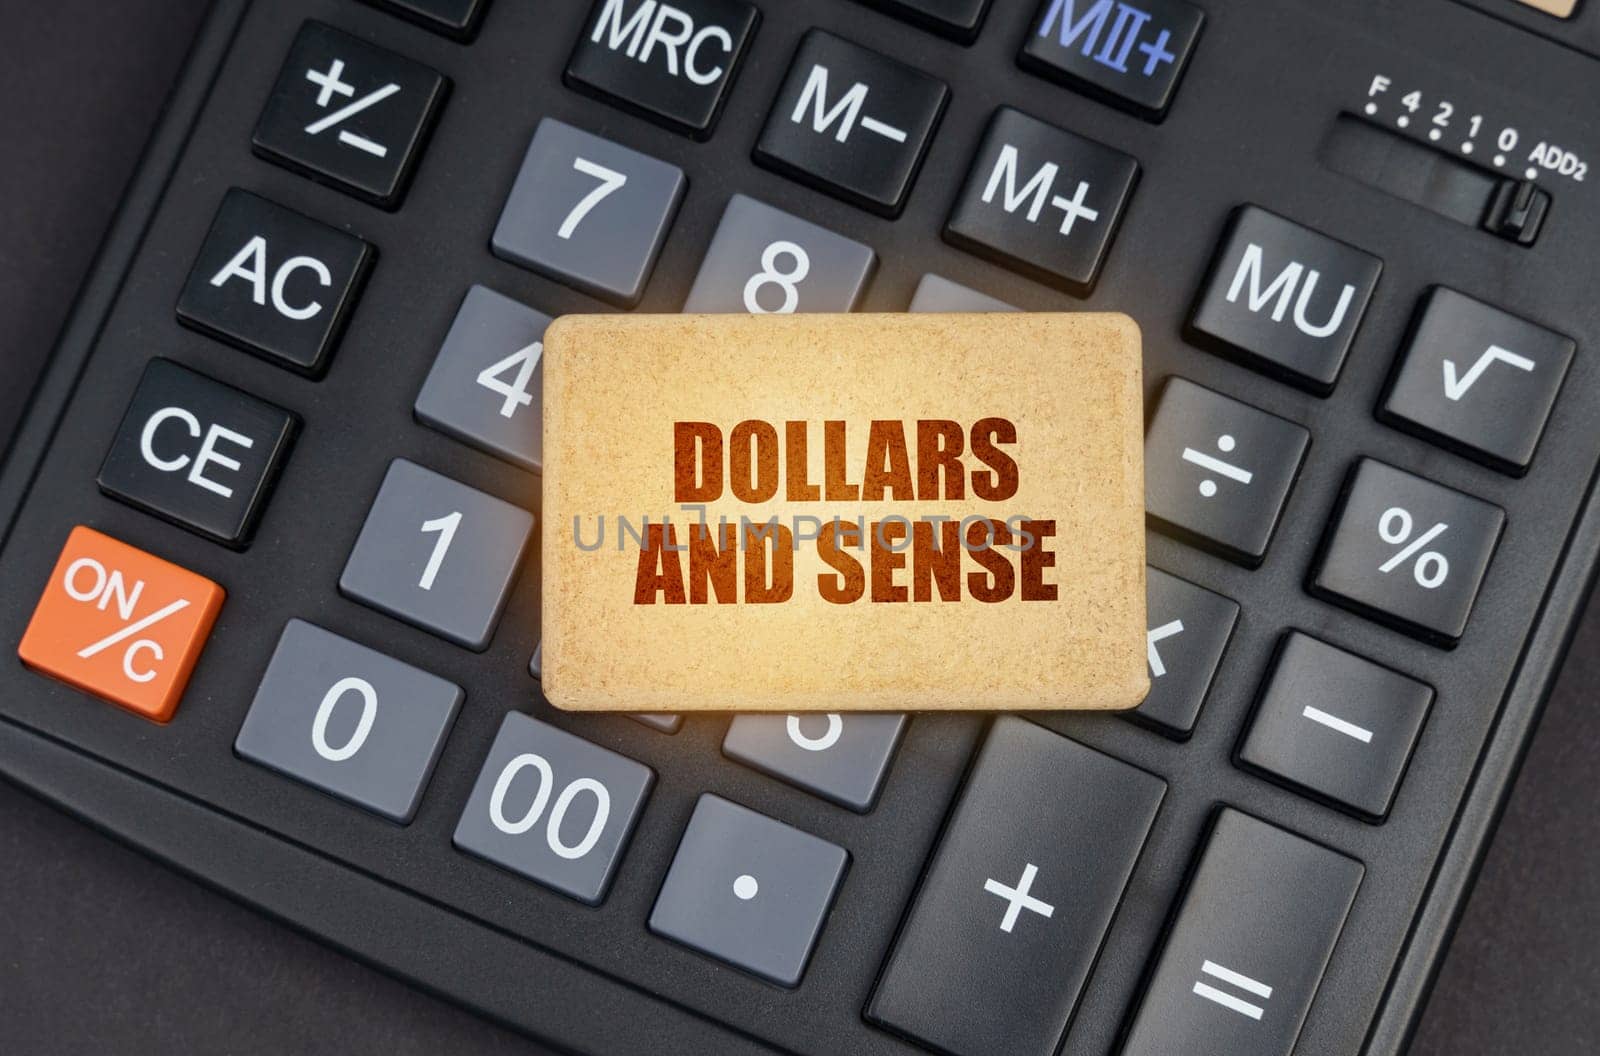 There is a sign on the calculator that says - Dollars and sense by Sd28DimoN_1976